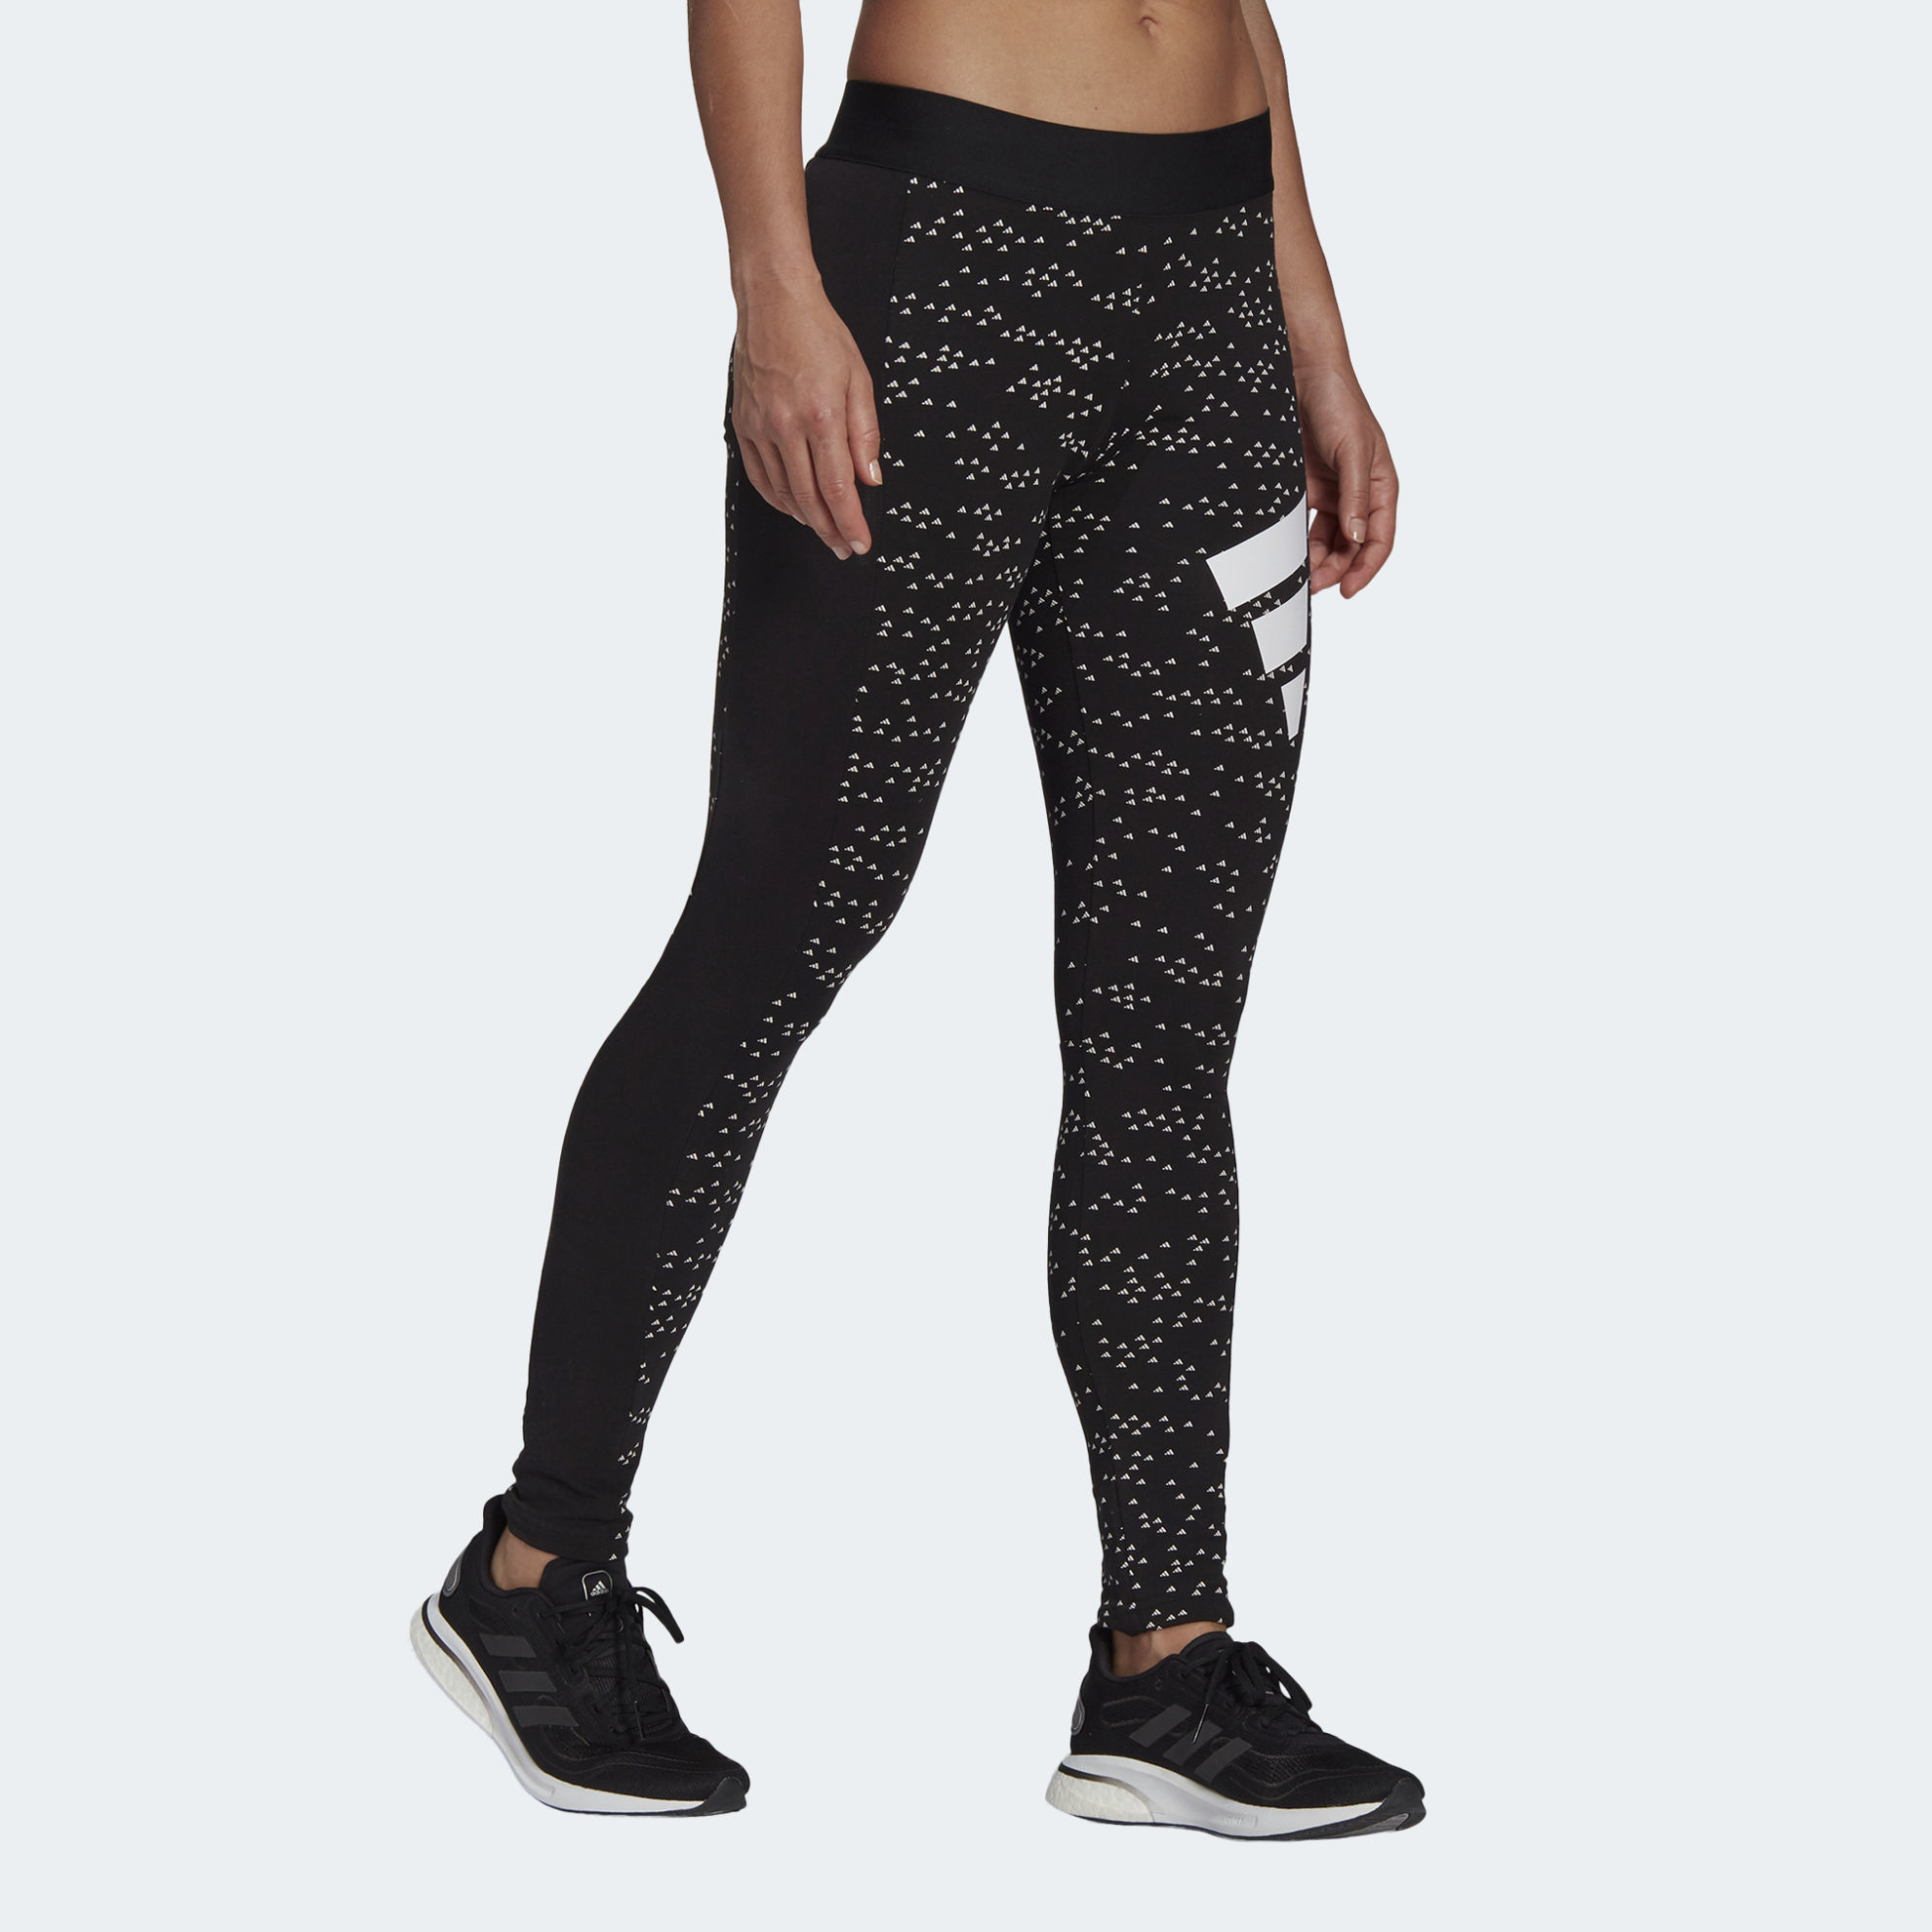 Agriculture Adidas International 1099 Size of | Precision Leggings Society